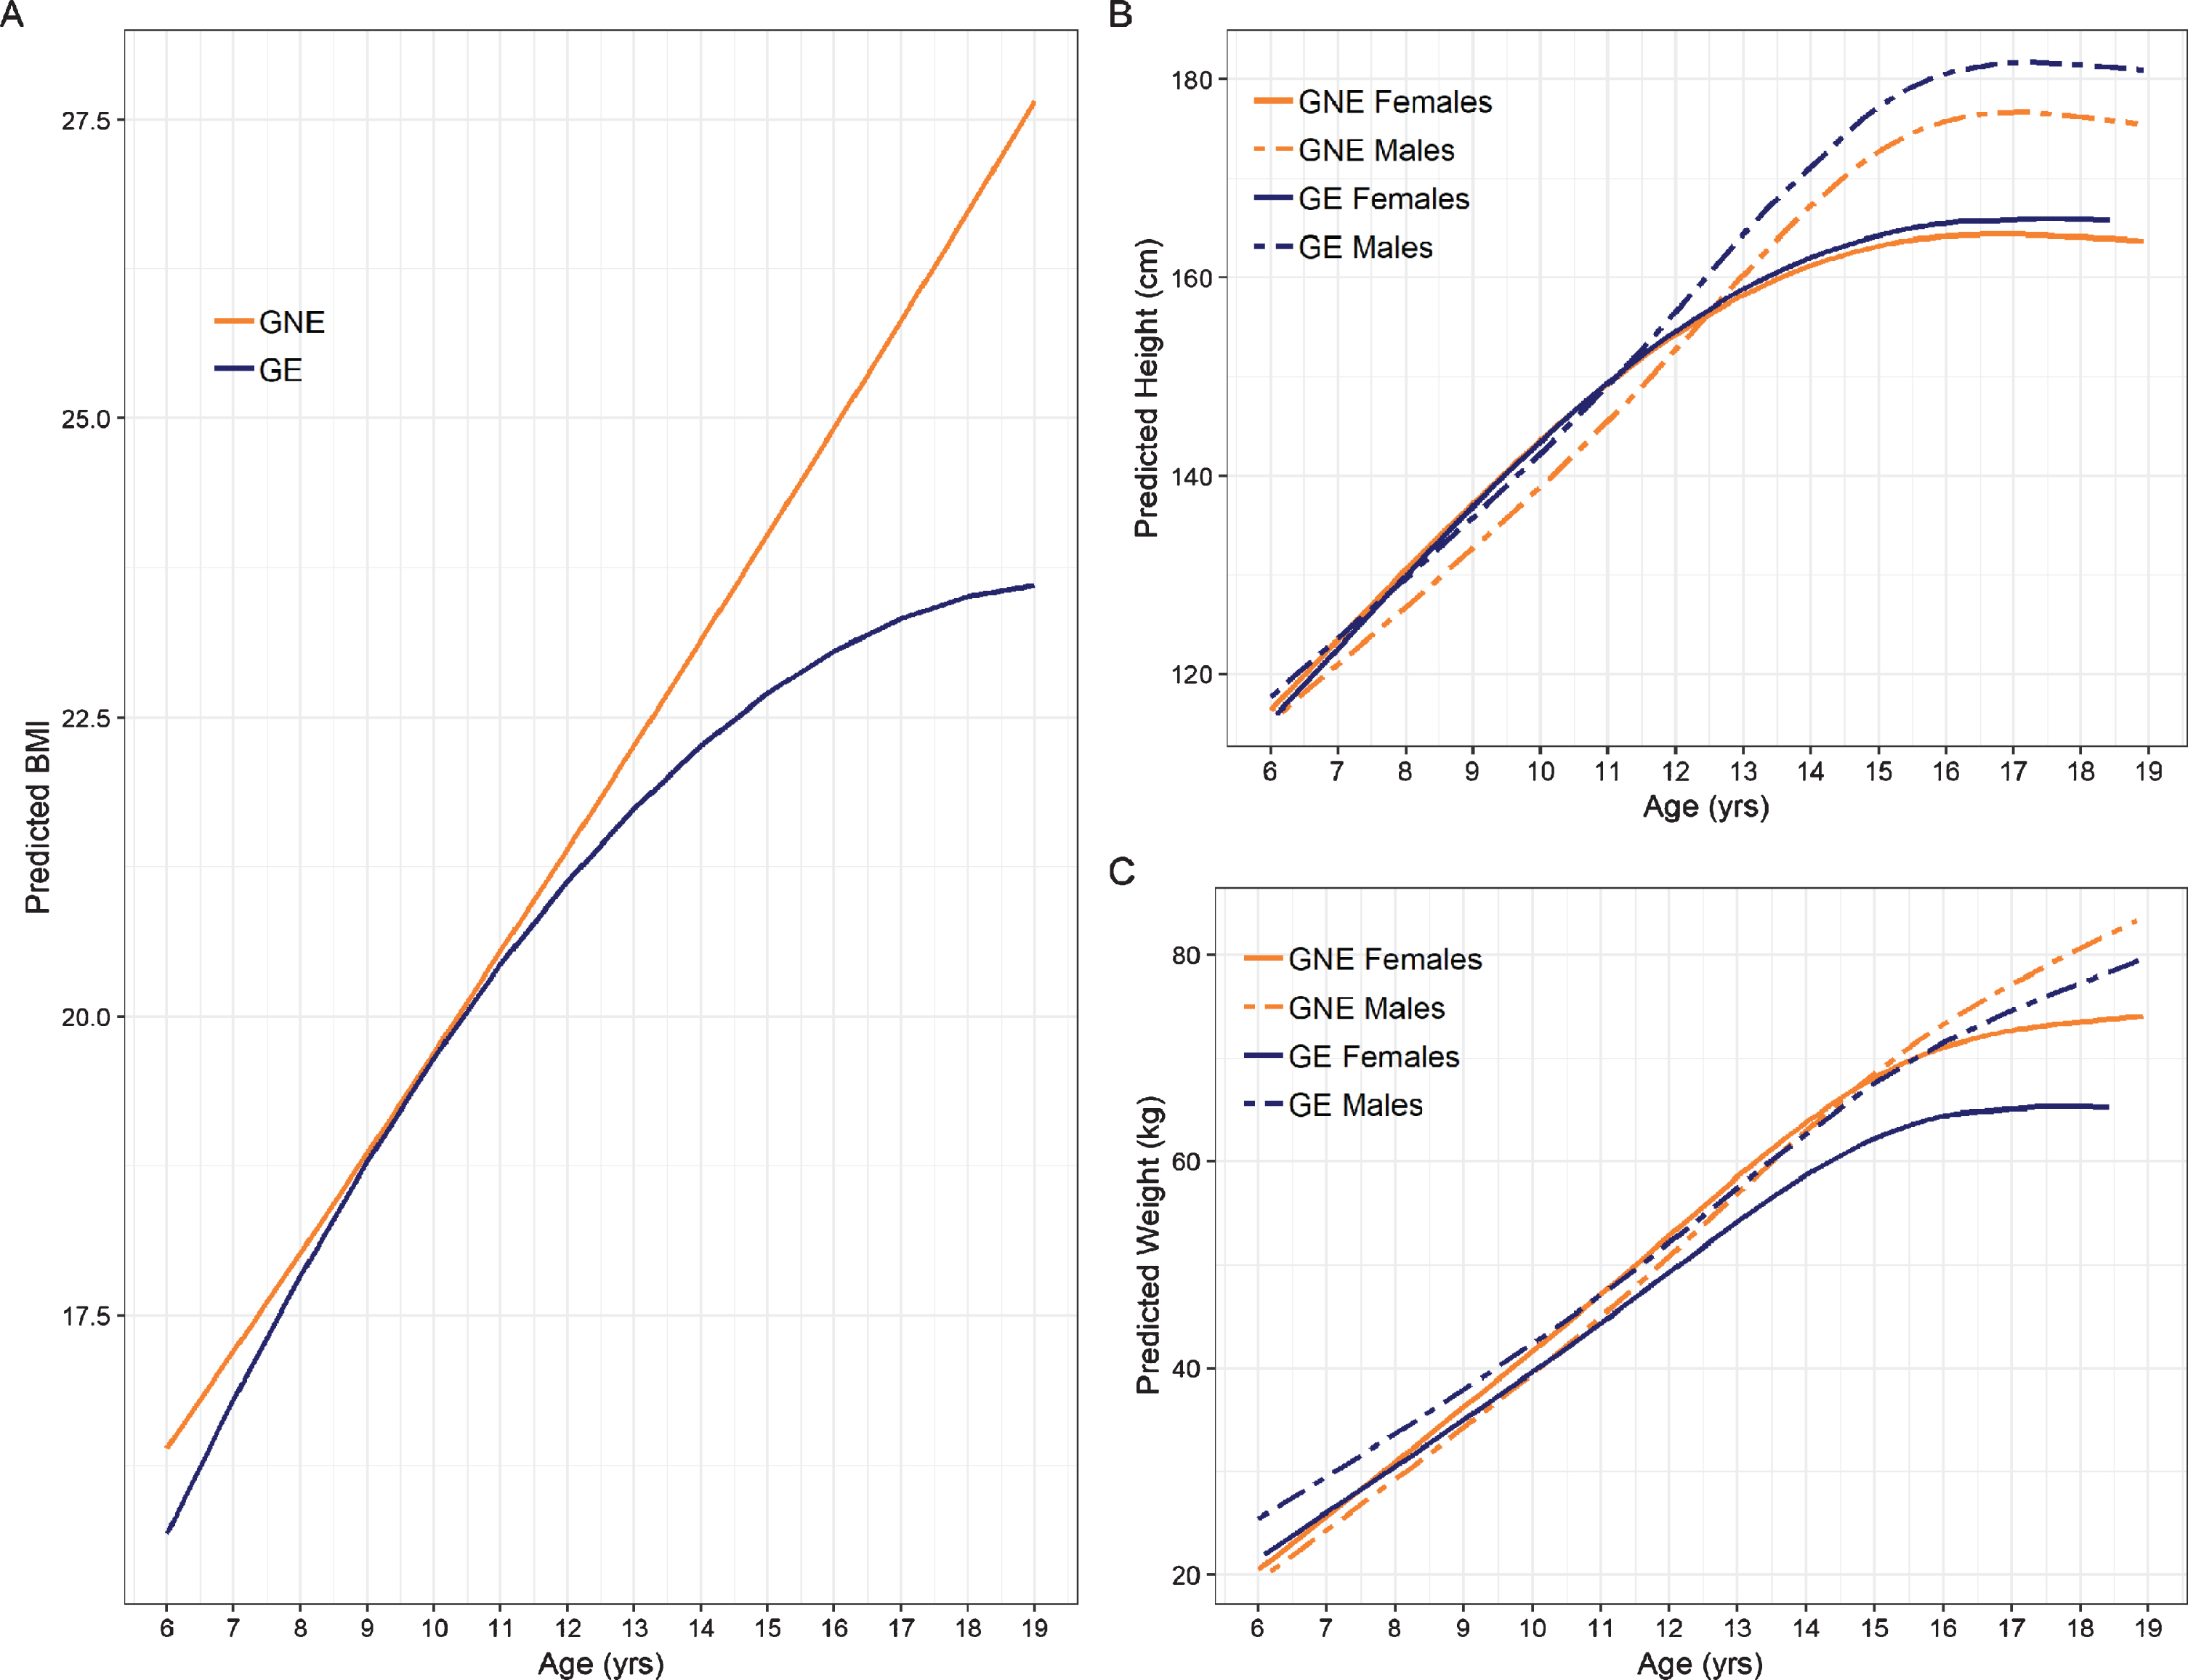 Trajectories of anthropometric growth as a function of gene status and sex. Panel A shows predicted curves for BMI trajectories for GNE (orange) and GE (blue). Note that the mean male and female trajectories are shown, as there was no significant interaction between groups and sex. Panel B illustrates predicted height trajectories across groups and sex, where females are represented by solid lines and males are represented by dashed lines. GE males were significantly taller than their GNE counterparts, while females exhibited similar height across groups. Panel C shows growth curves for weight. GE females weighed less than their GNE counterparts. Weight in males was similar across groups.